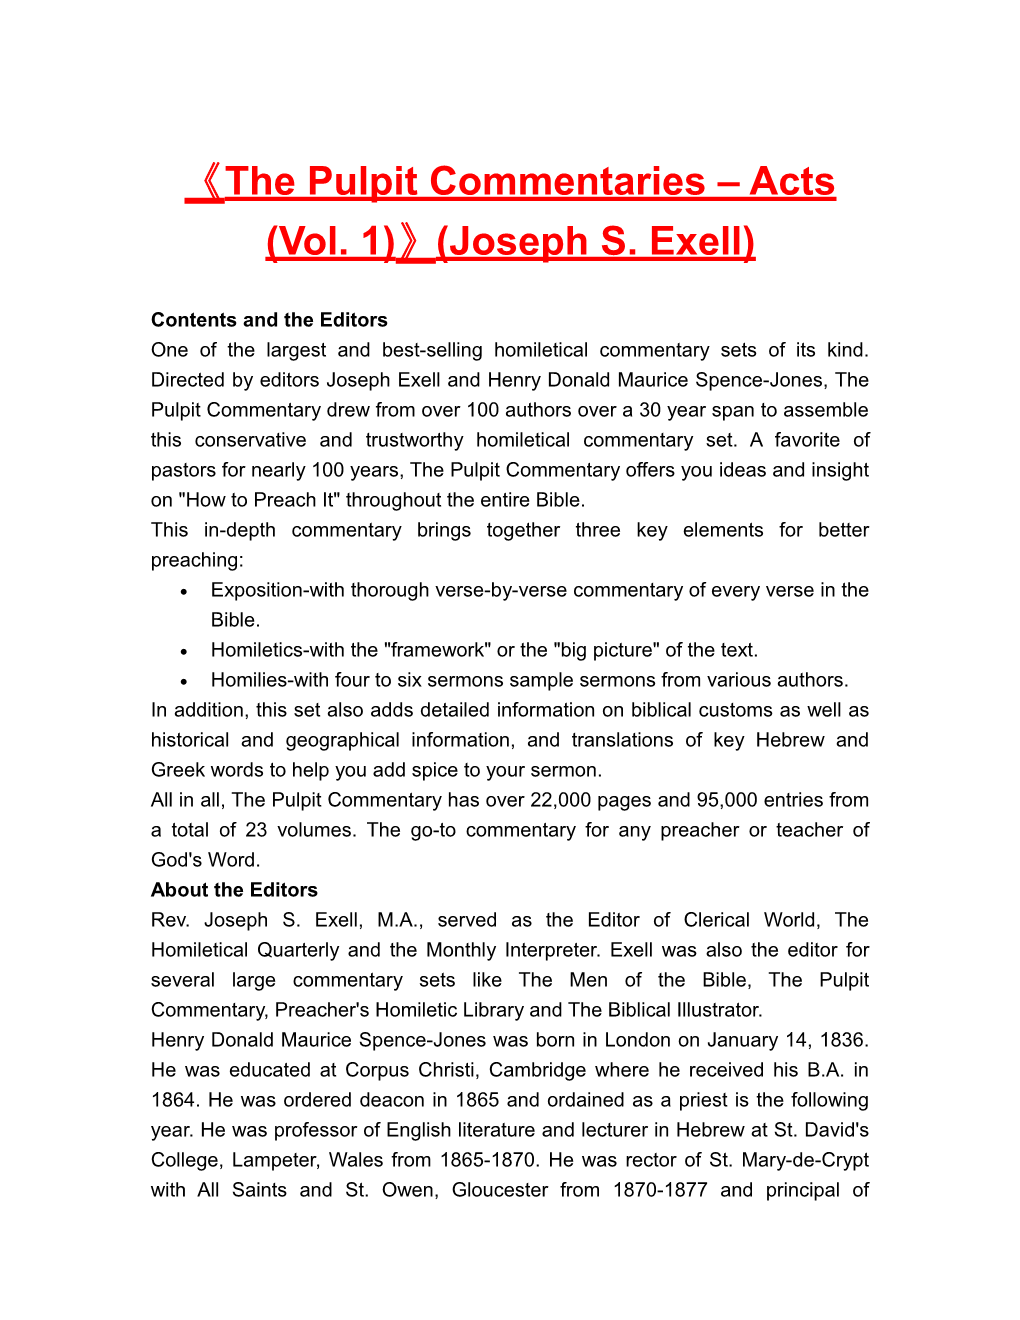 The Pulpit Commentaries Acts (Vol. 1) (Joseph S. Exell)